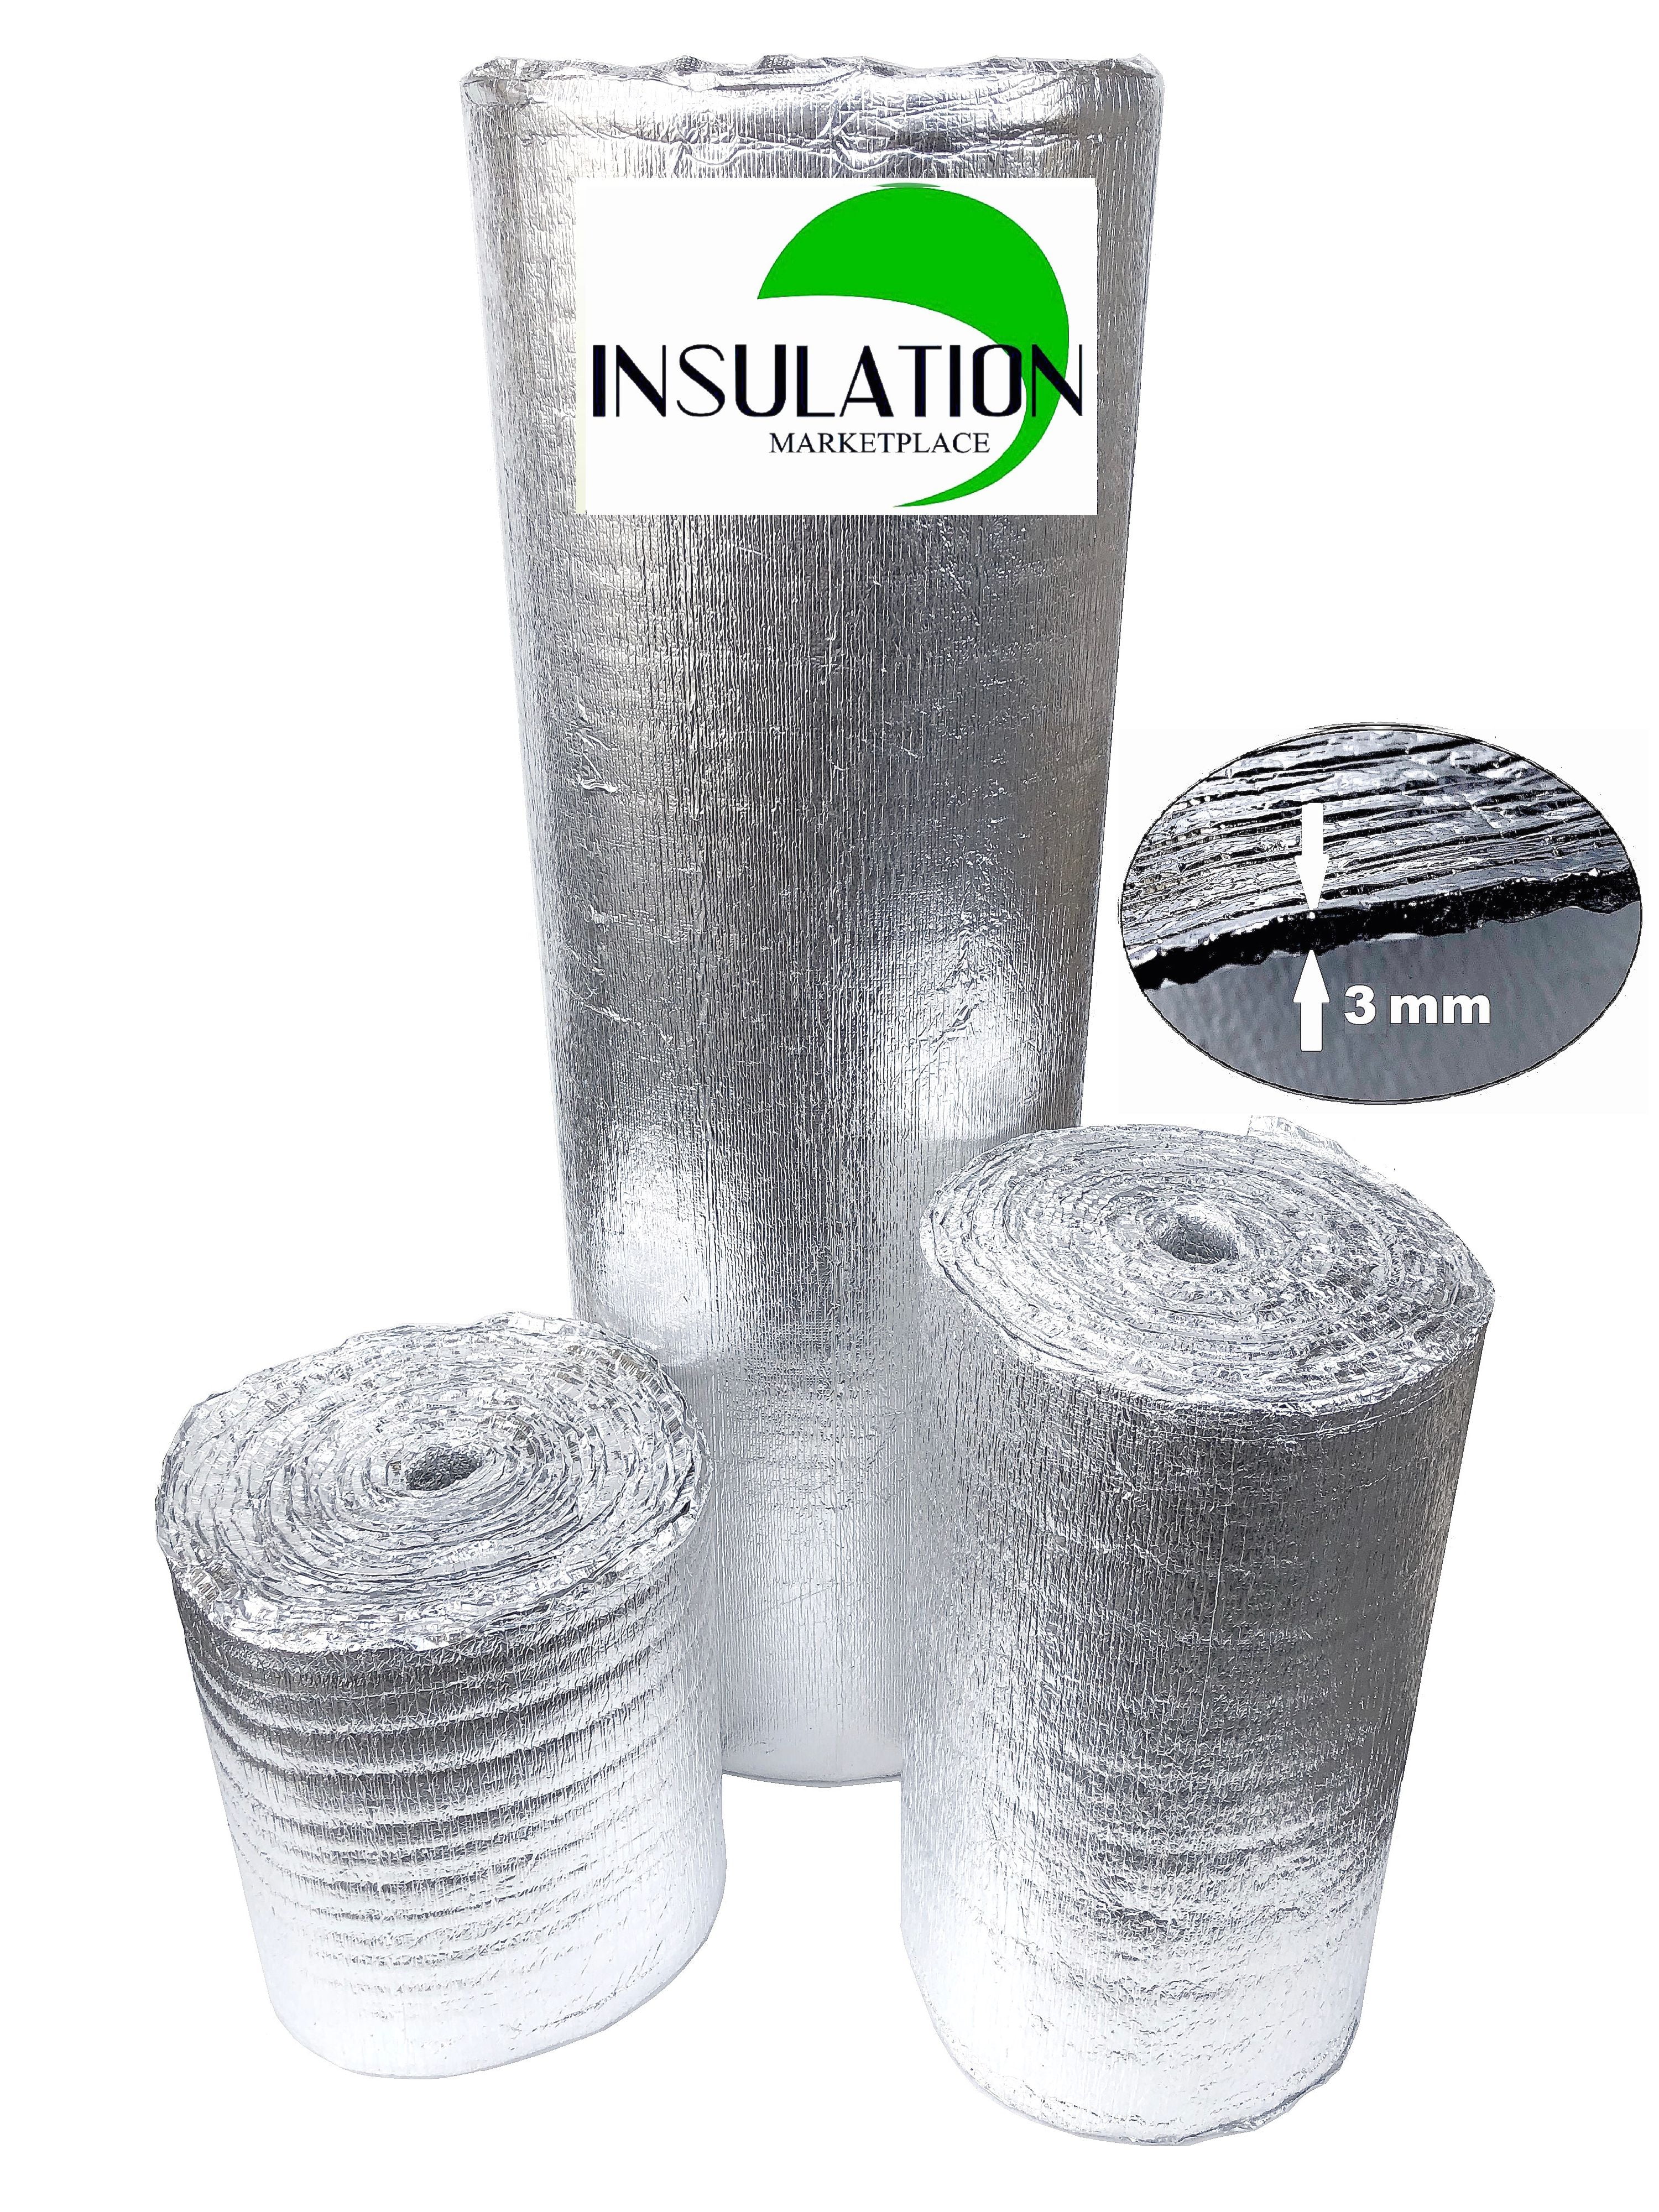 US Energy 5MM Reflective Foam Core Insulation RADIANT BARRIER  24''X50ft roll 